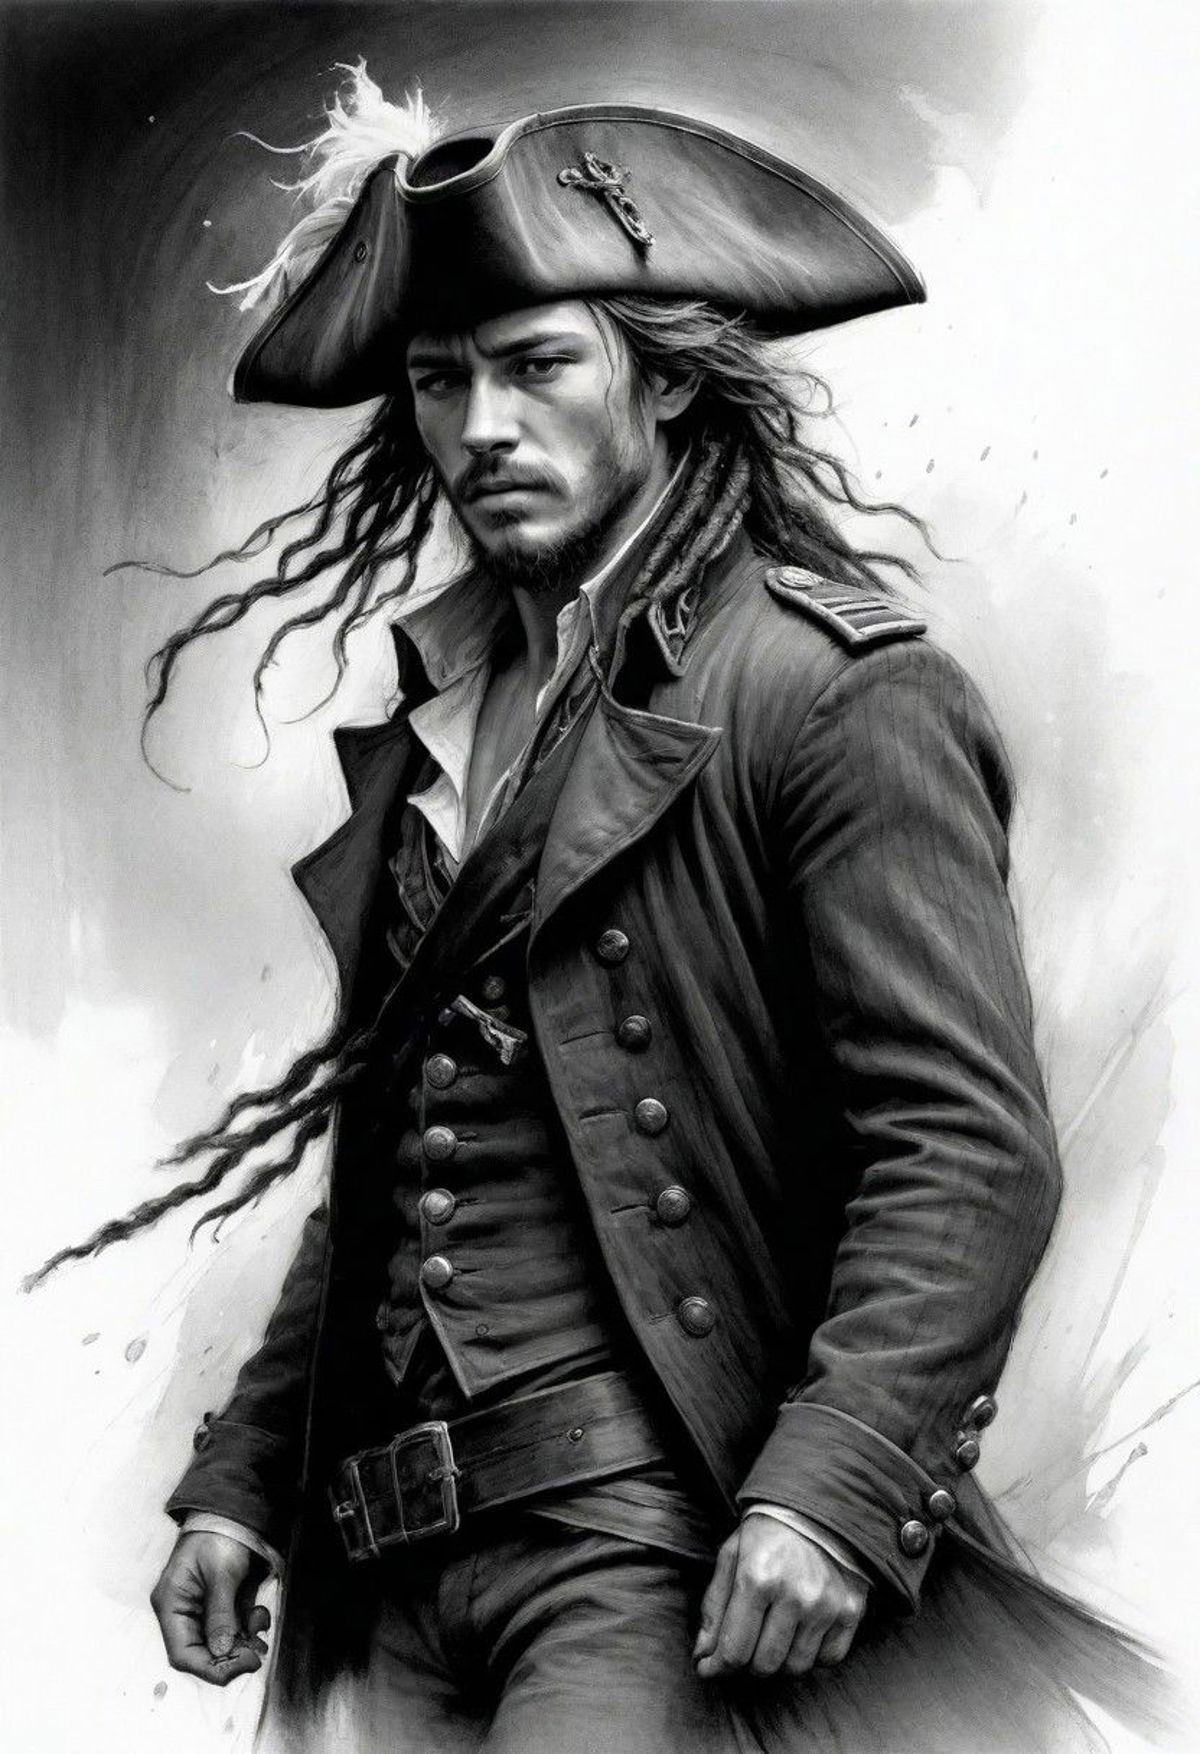 A Pirate Painting of a Man with a Long Ponytail, Pirate Hat, and Sword.